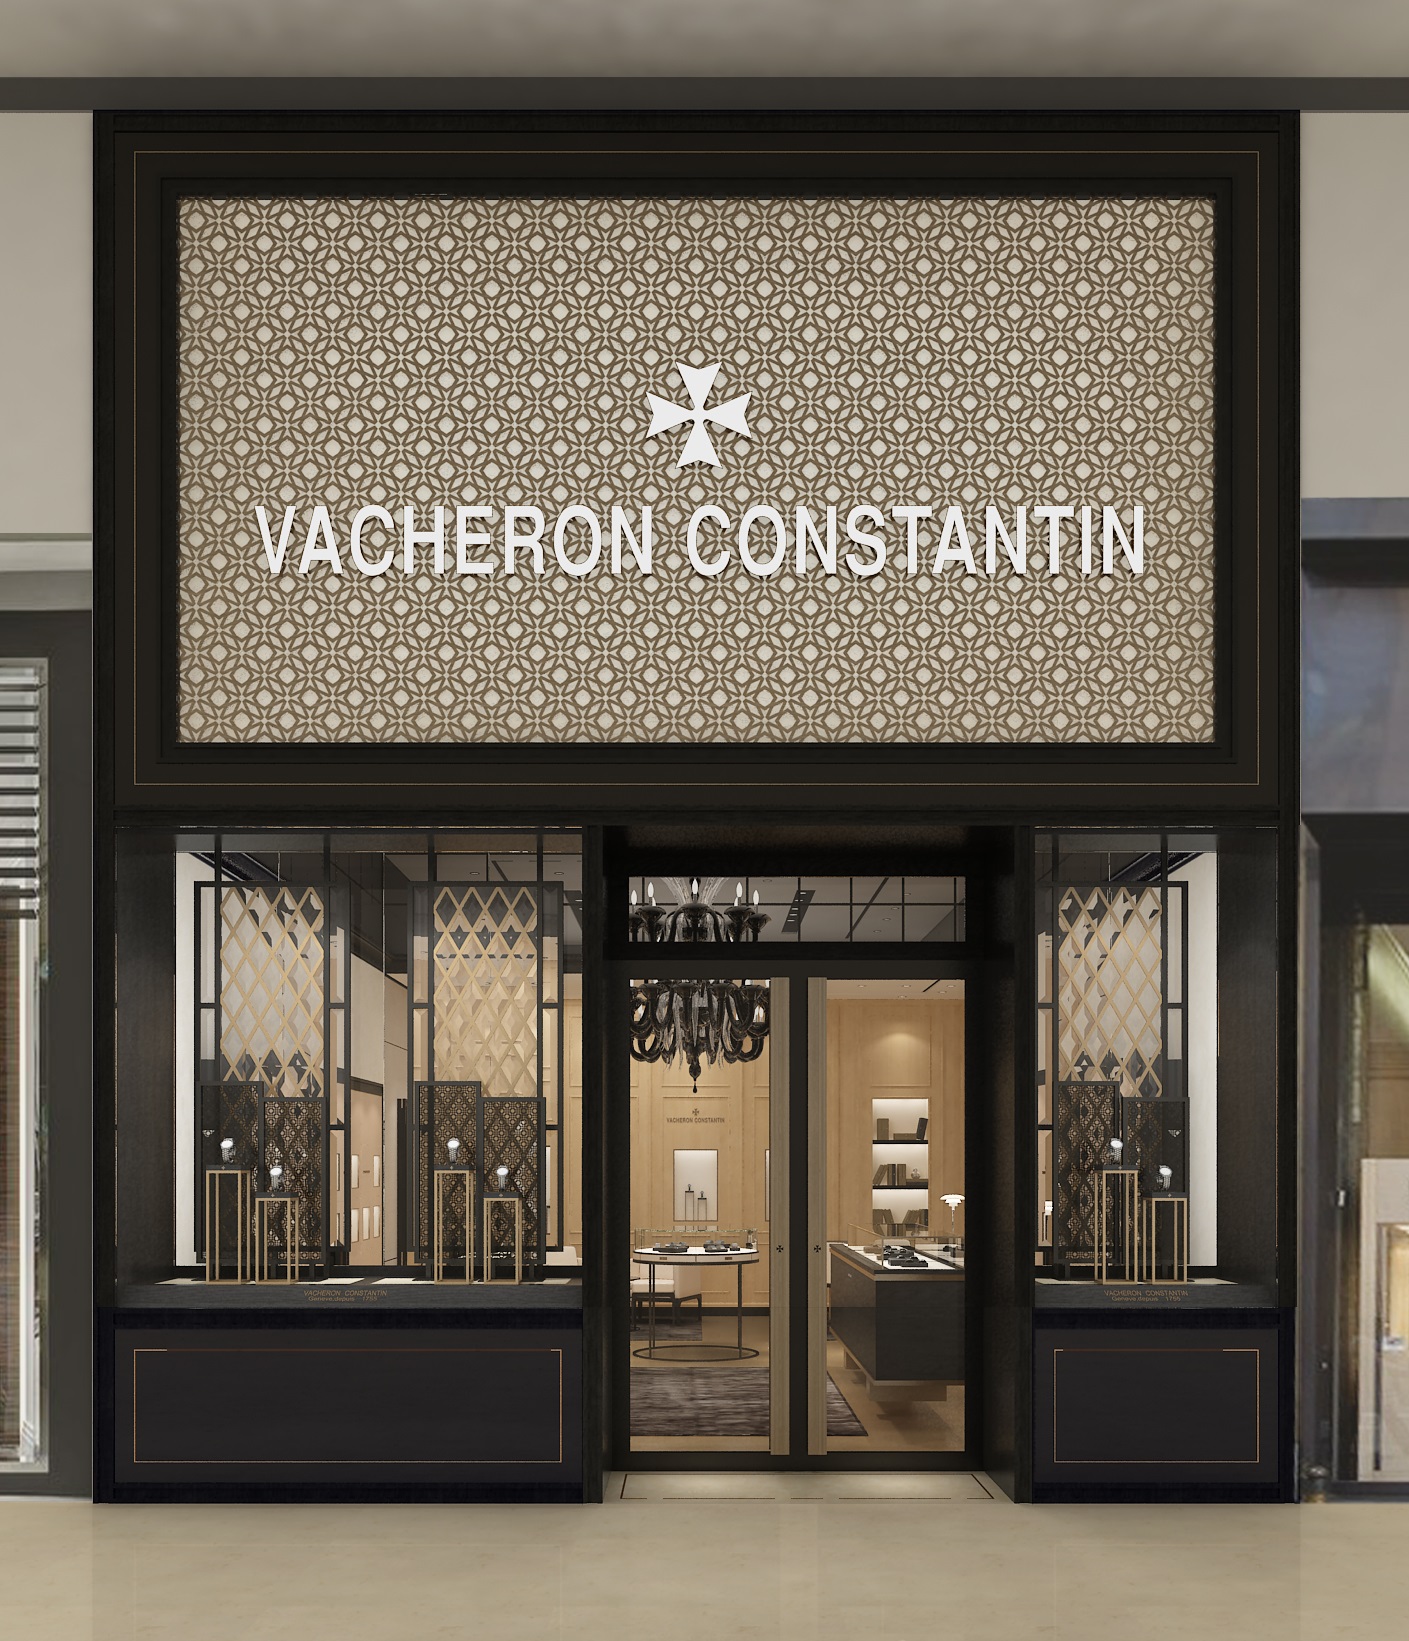 Vacheron Constantin Opens First Canadian Boutique in Toronto